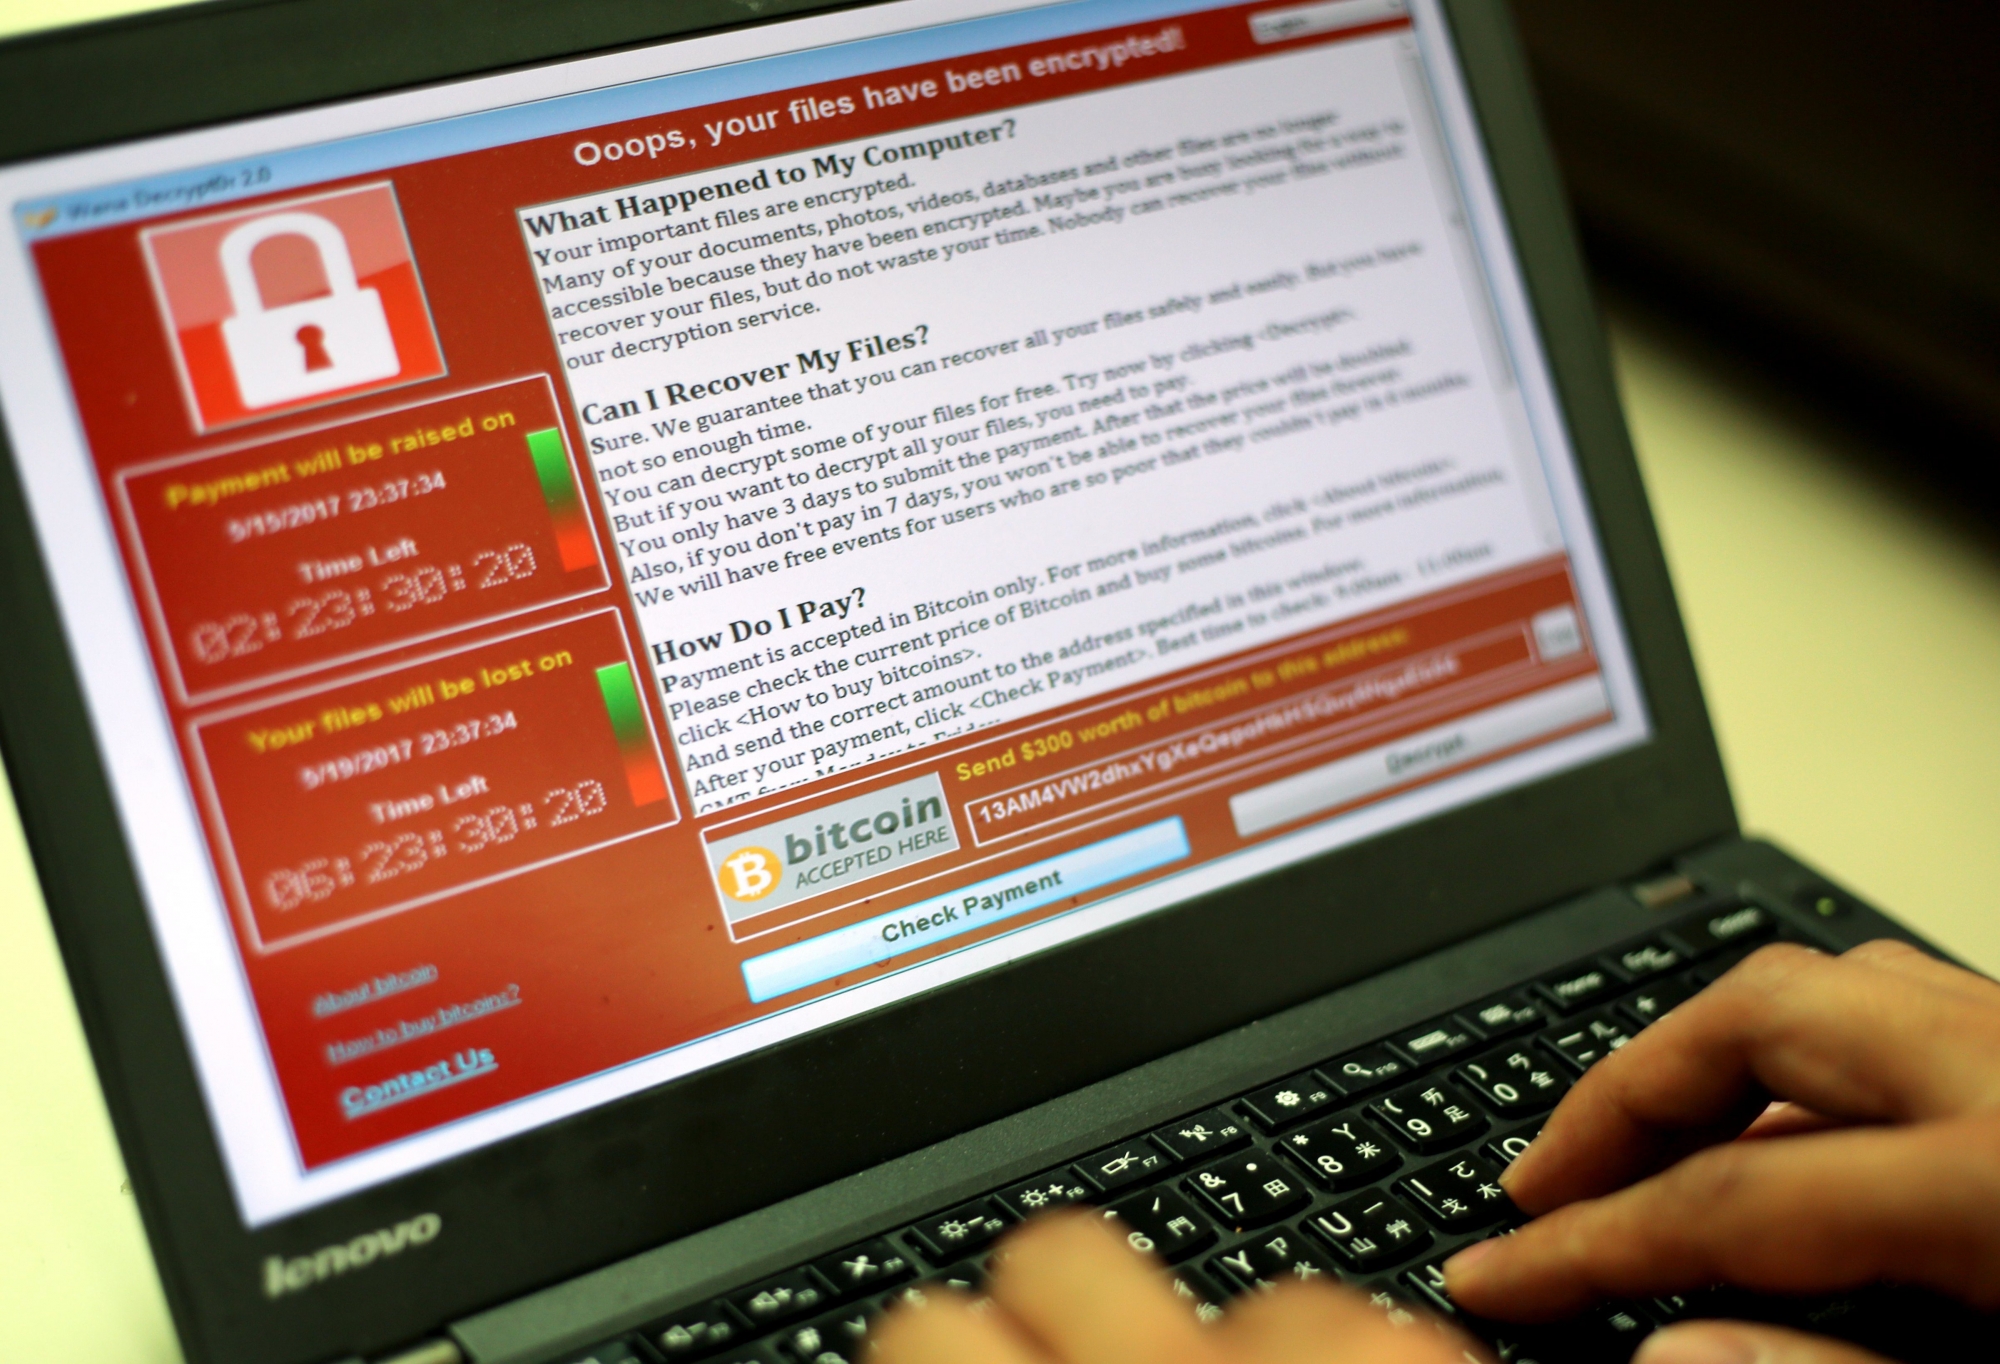 epa05960674 A programer shows a sample of a ransomware cyberattack on a laptop in Taipei, Taiwan, 13 May, 2017. According to news reports, a 'WannaCry' ransomware cyber attack hits thousands of computers in 99 countries encrypting files from affected computer units and demanding 300 US dollars through bitcoin to decrypt the files.  EPA/RITCHIE B. TONGO TAIWAN CYBER ATTACK